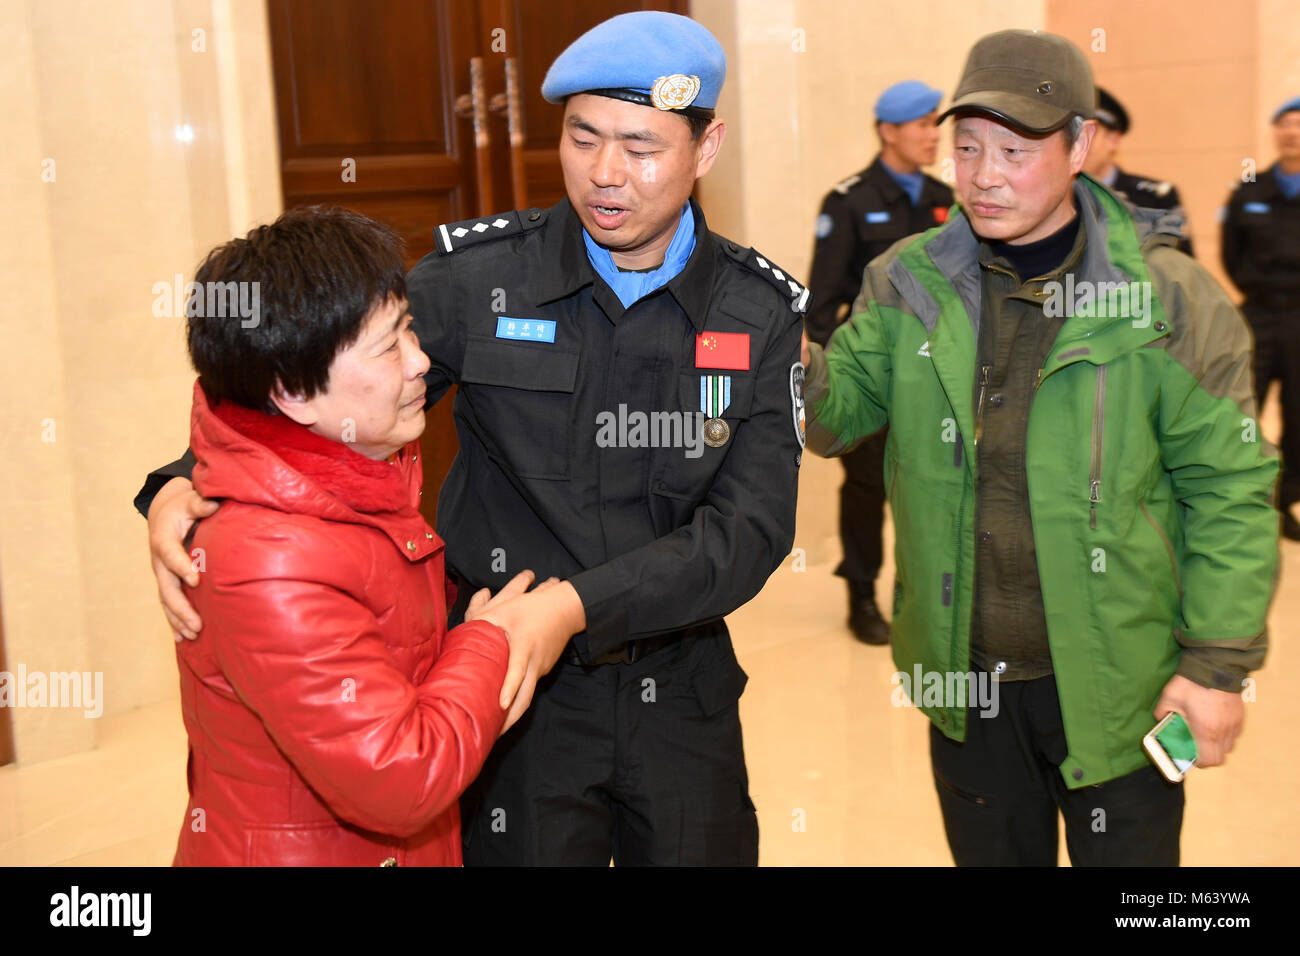 (180228) -- HANGZHOU, Feb. 28, 2018 (Xinhua) -- Chinese peacekeeper Han Zhuoqi (C) is greeted by his parents upon his arrival at the Hangzhou Xiaoshan International Airport in Hangzhou, capital of east China's Zhejiang Province, Feb. 27, 2018, after conducting a one-year mission in South Sudan. The sixth team of Chinese peacekeeping police to South Sudan, with seven members all selected from Zhejiang, arrived in Hangzhou Tuesday evening. In South Sudan, the police officers fulfilled a variety of tasks in the capital Juba and Wau, including patrols of refugee camps, humanitarian aid and communi Stock Photo